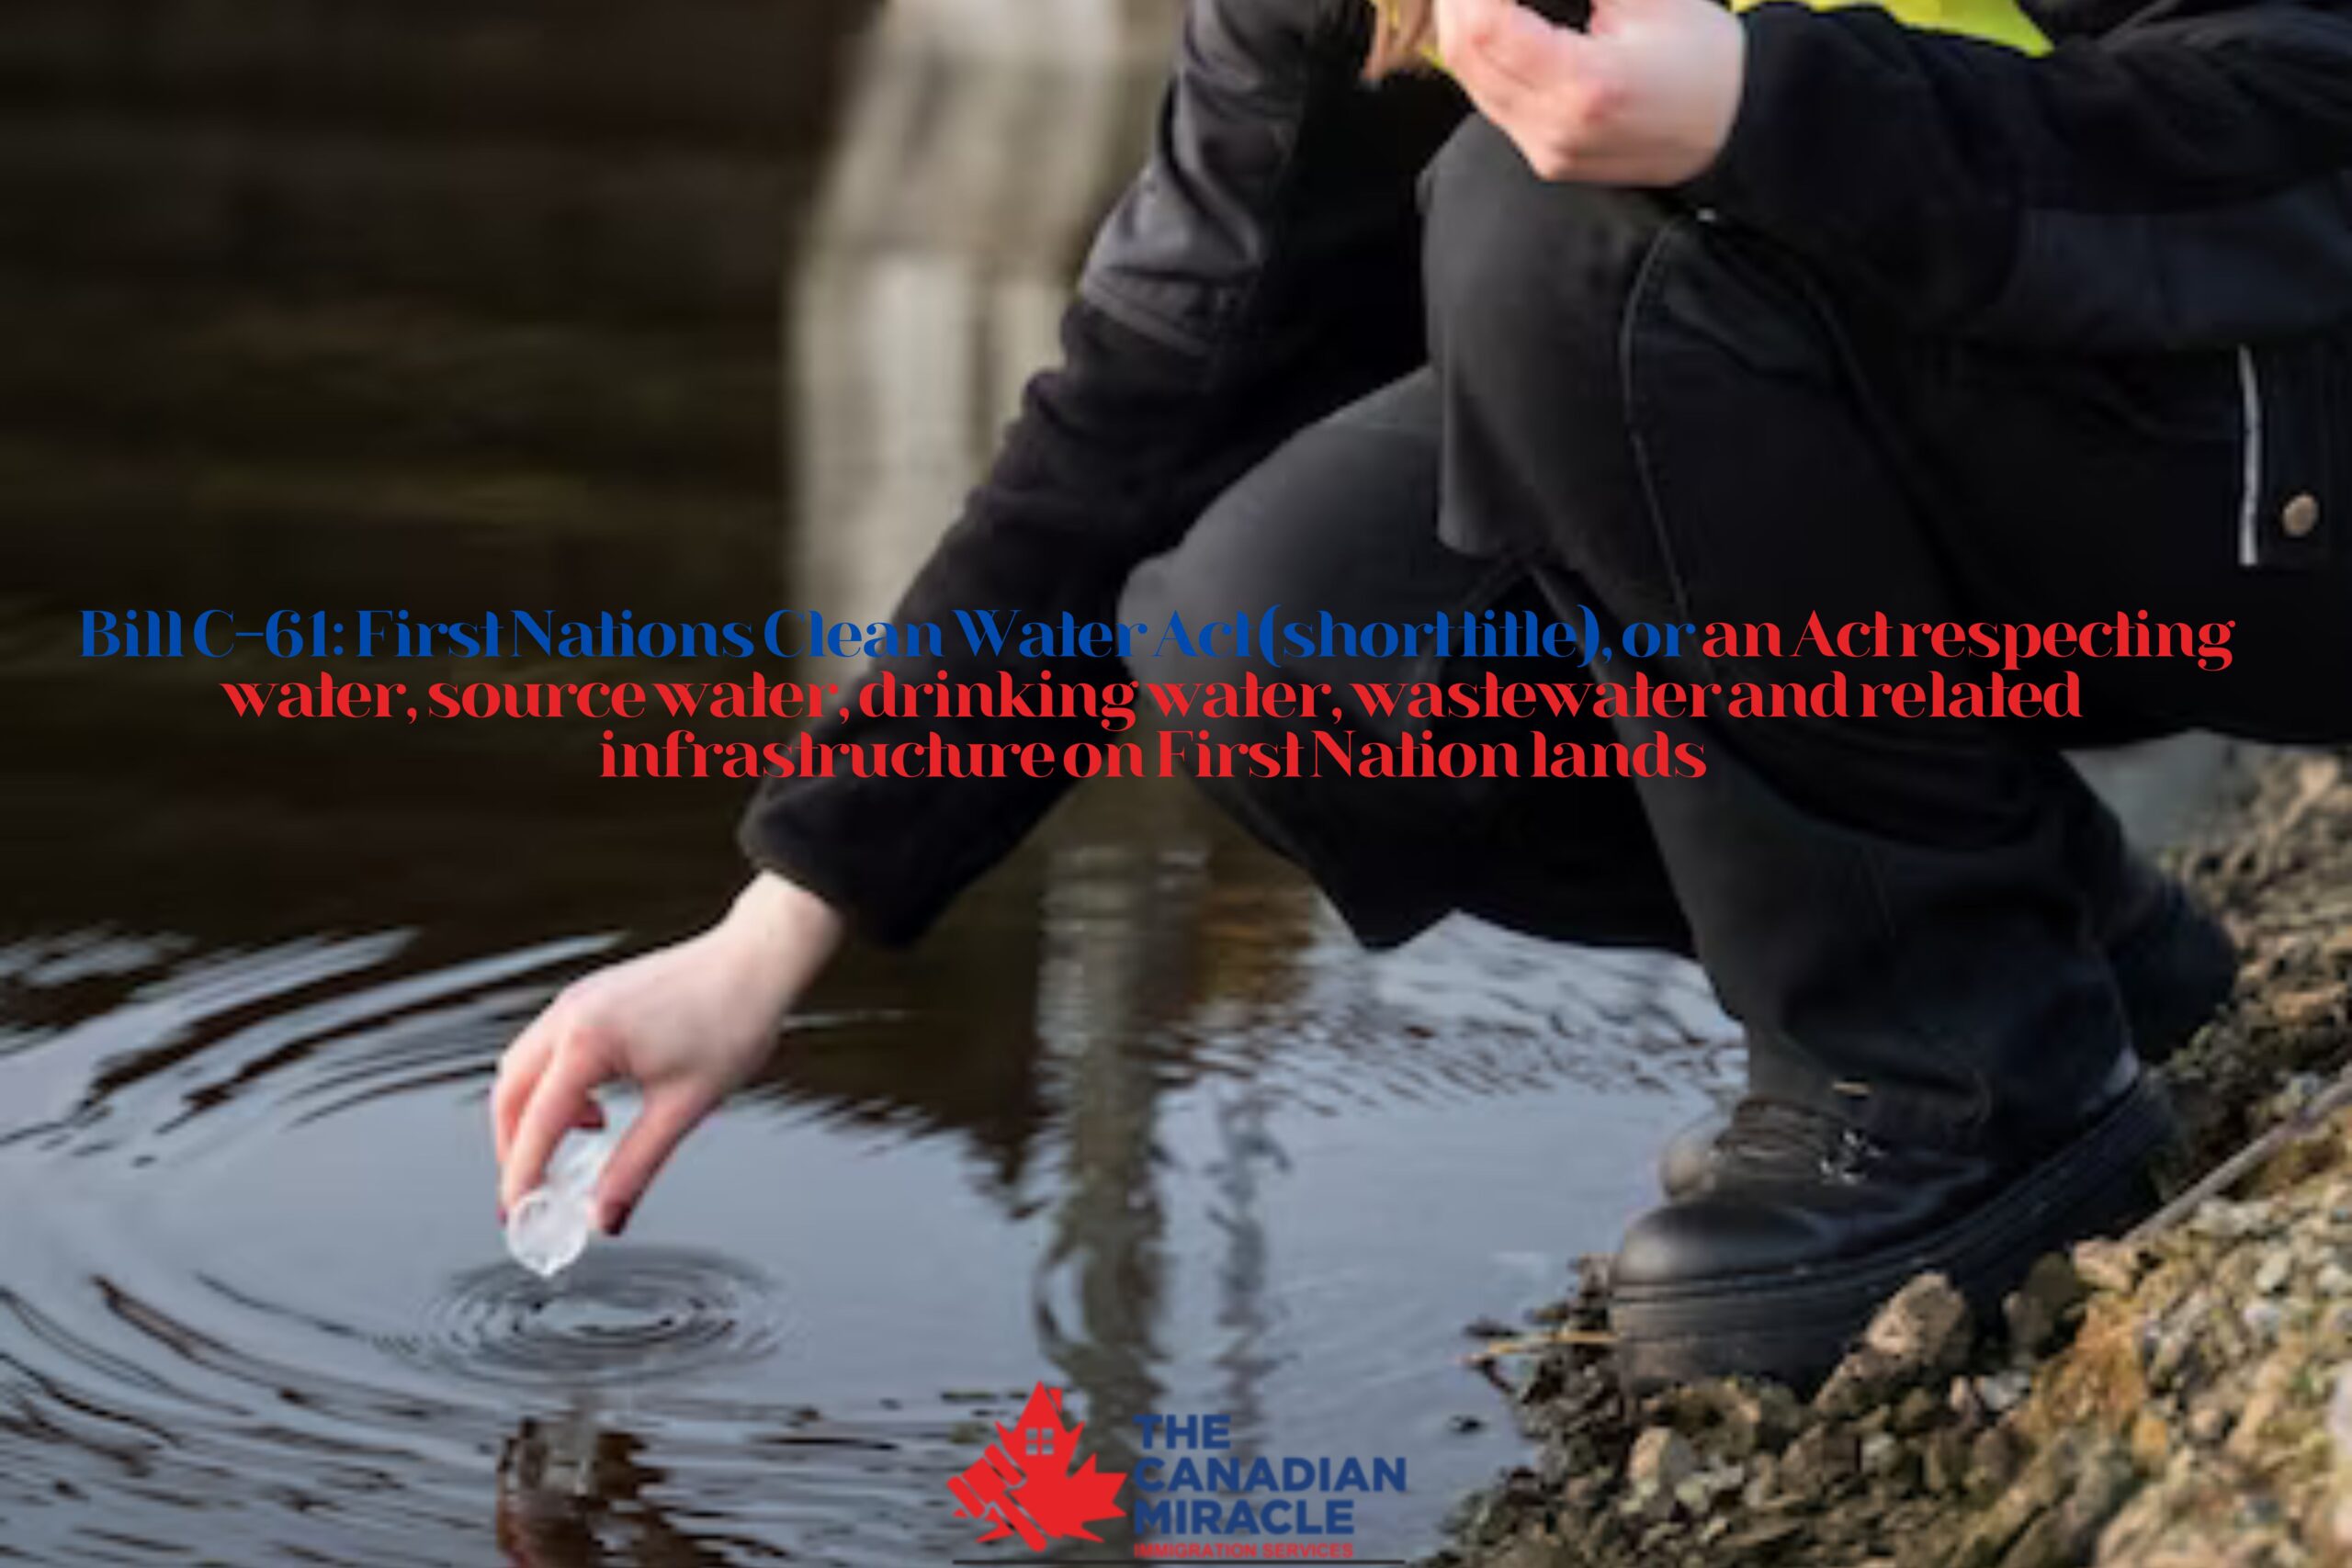 Bill C-61: First Nations Clean Water Act (short title), or an Act respecting water, source water, drinking water, wastewater and related infrastructure on First Nation lands